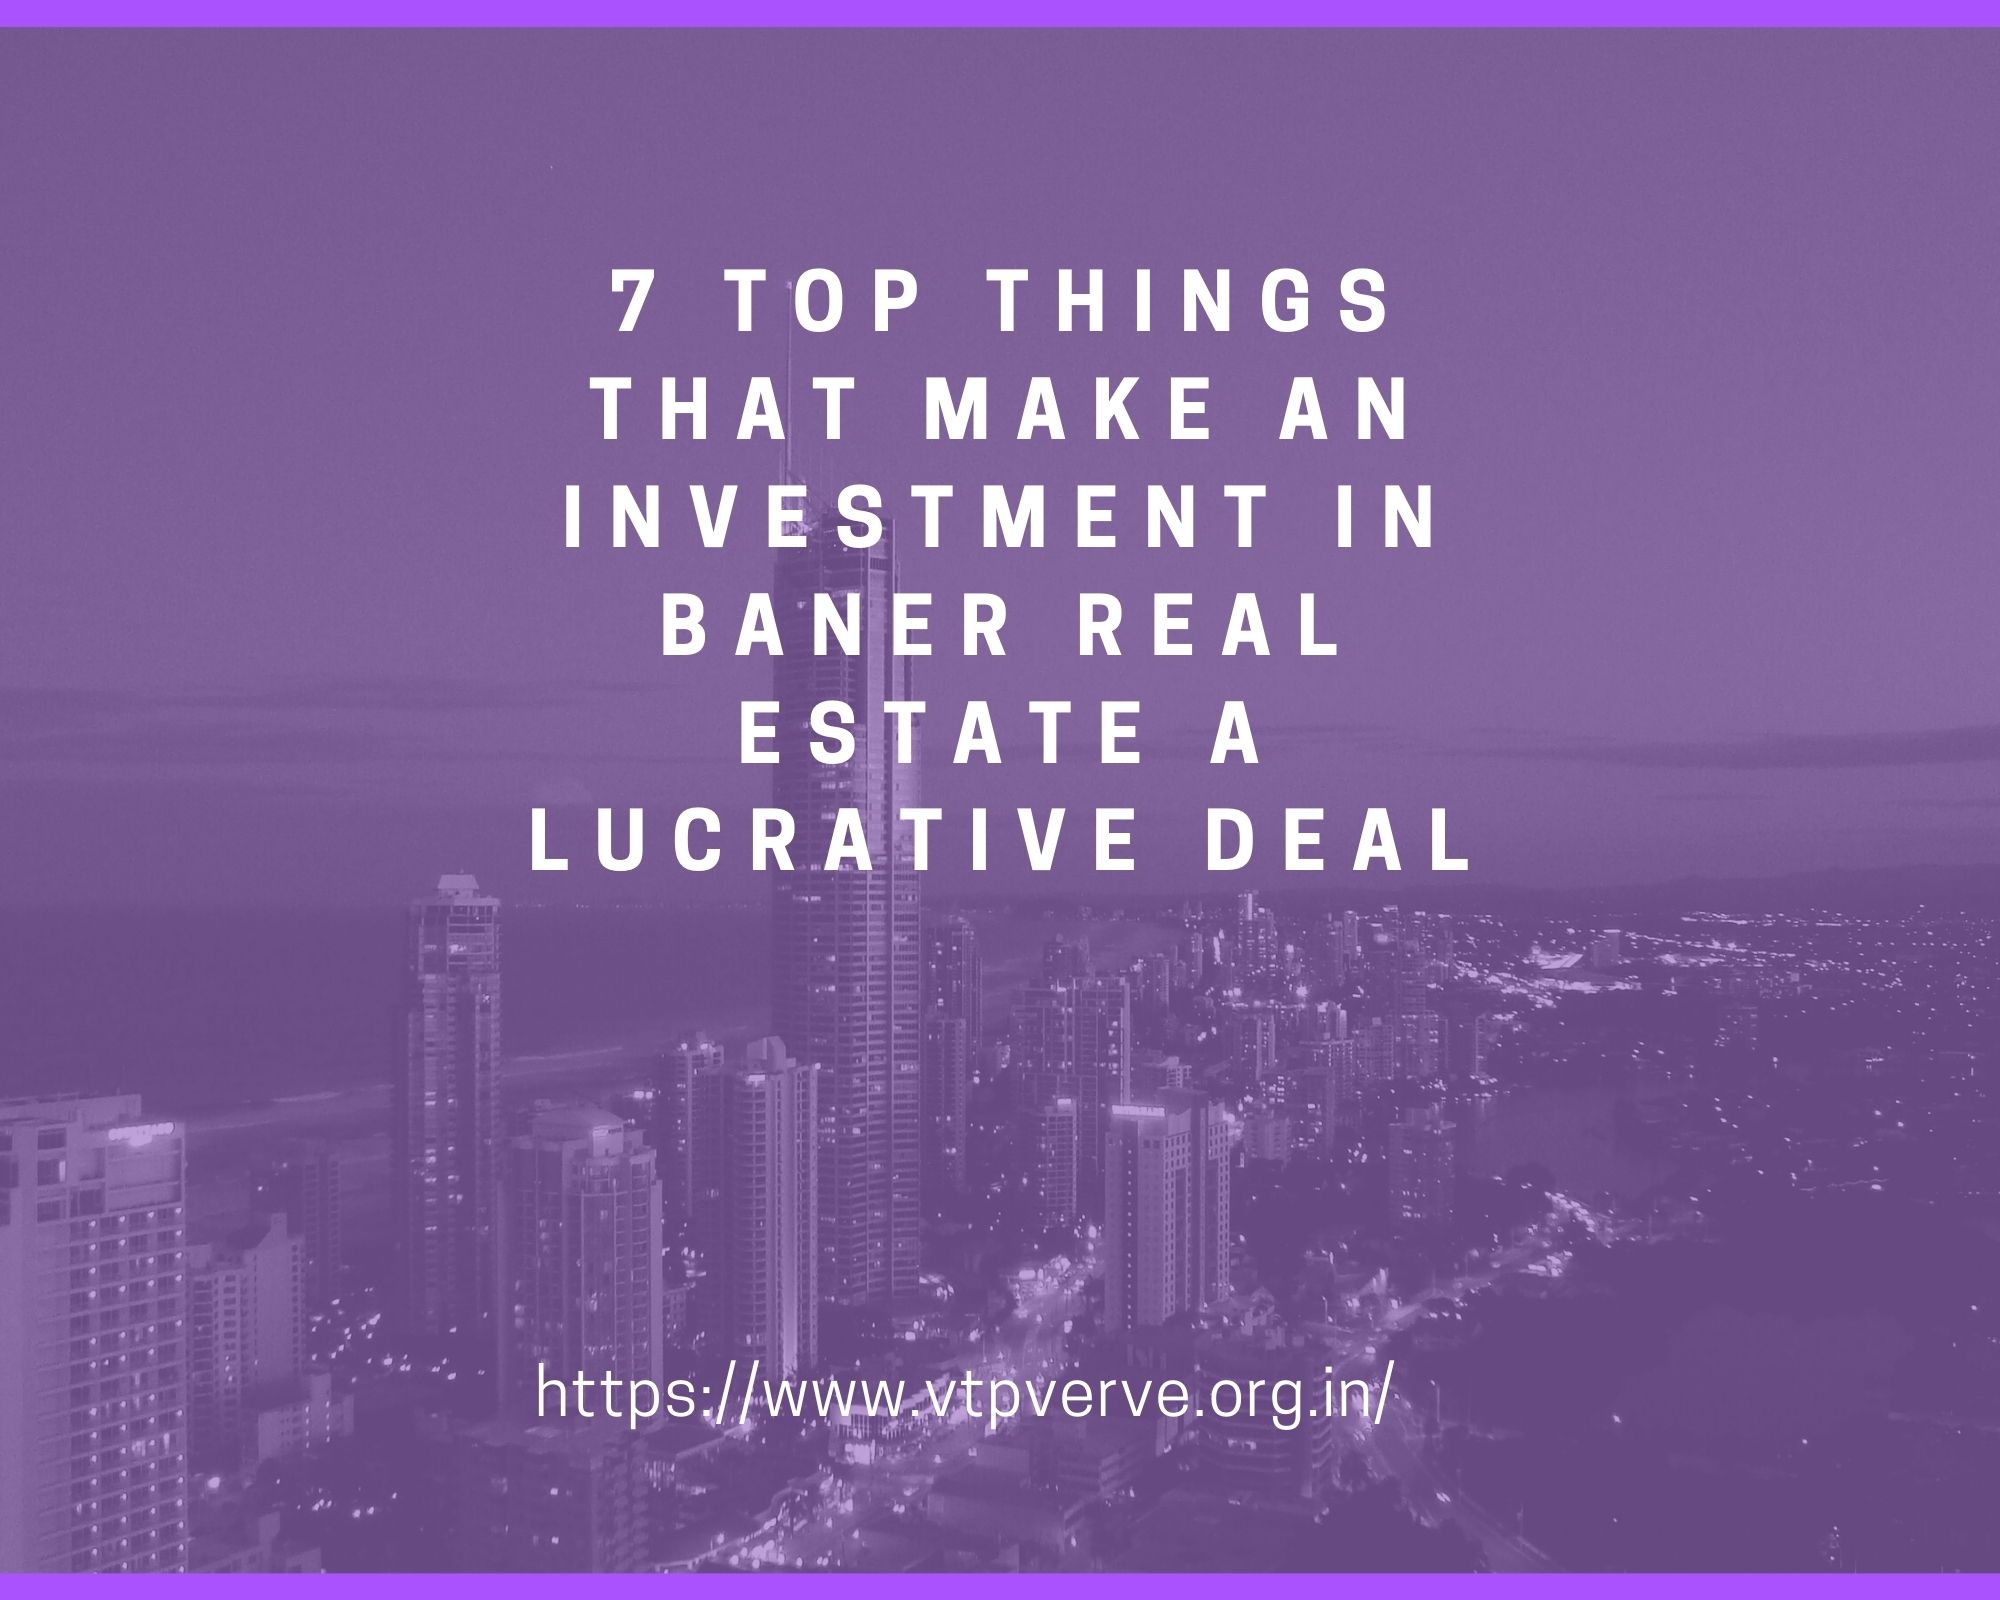 7 top things that make an investment in Baner real estate a lucrative deal